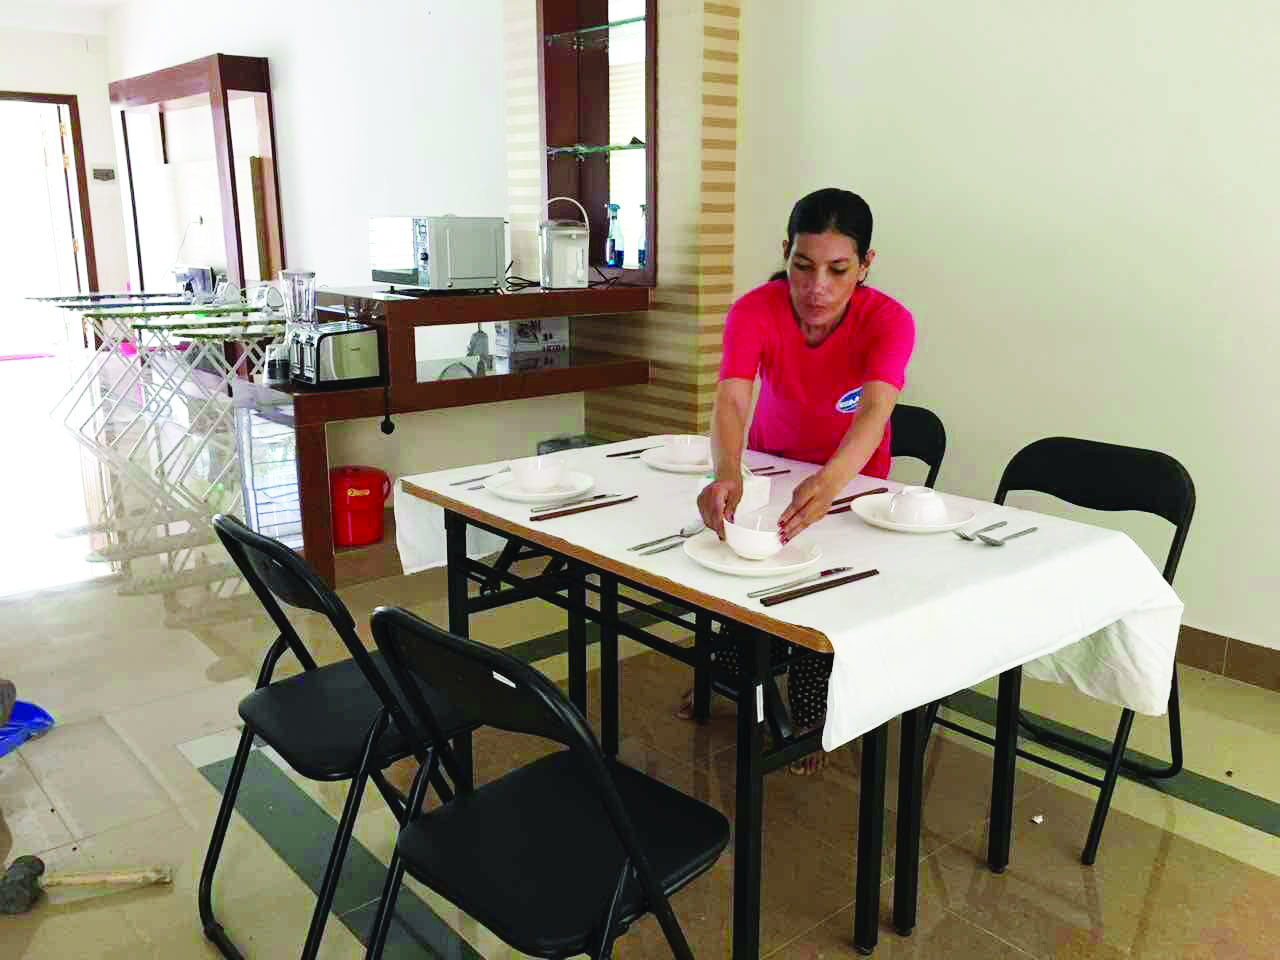 A Cambodian woman sets a table at a Phnom Penh training center on August 9, before beginning a new job in Hong Kong. Photo courtesy of the Phnom Penh Post